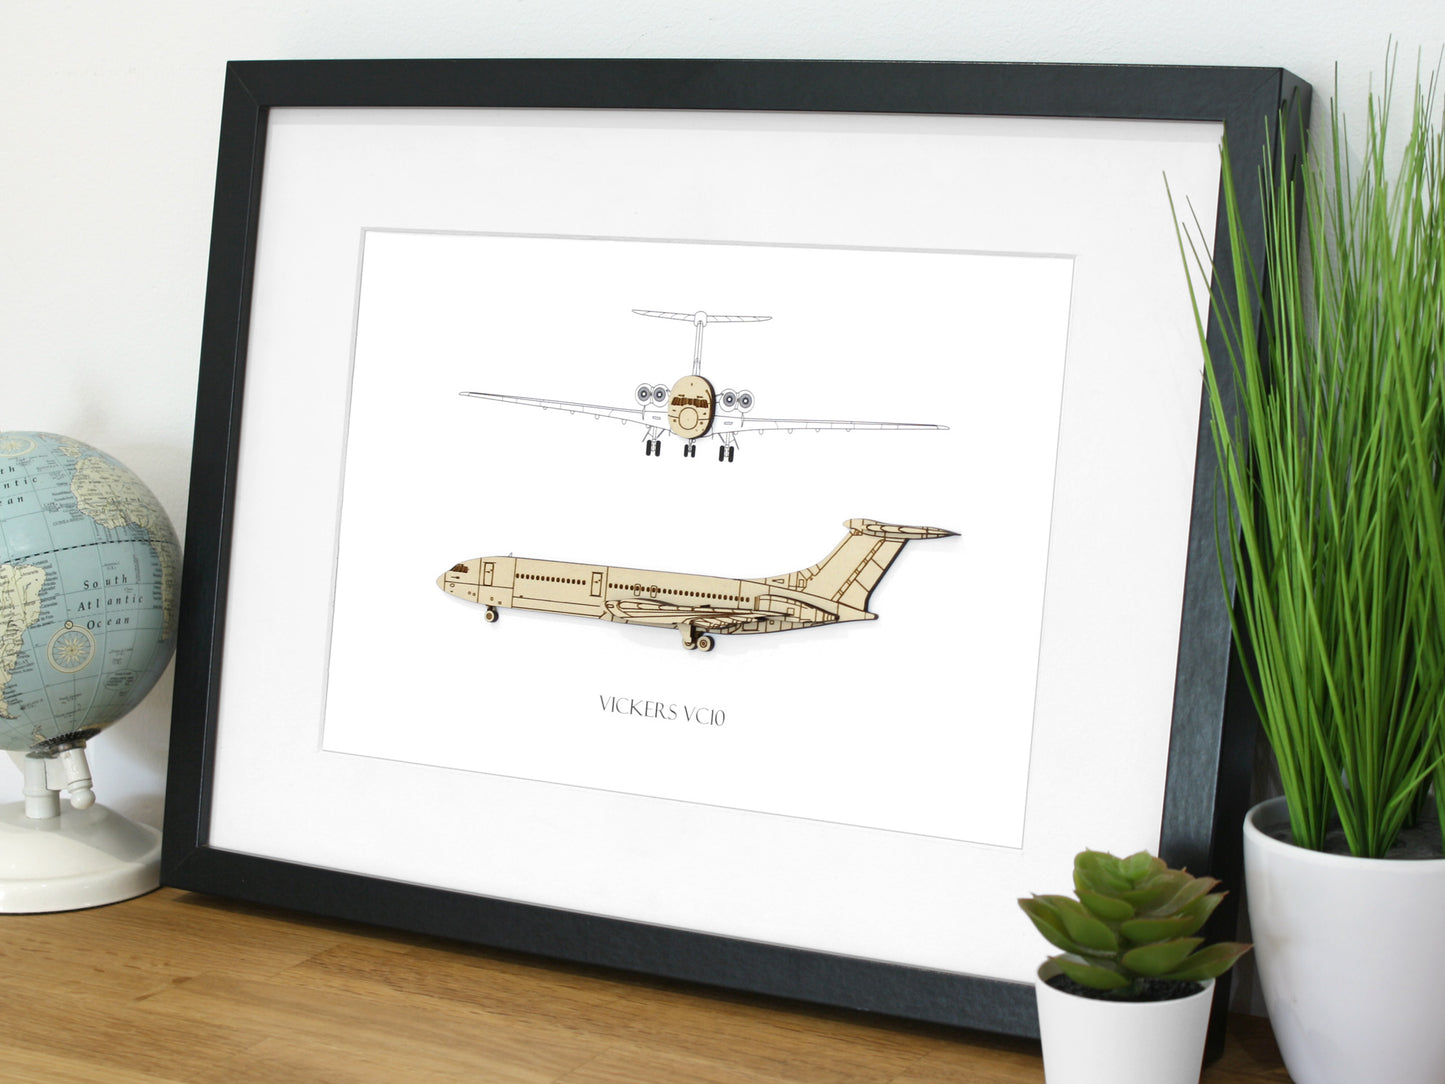 Vickers VC10 aviation gifts